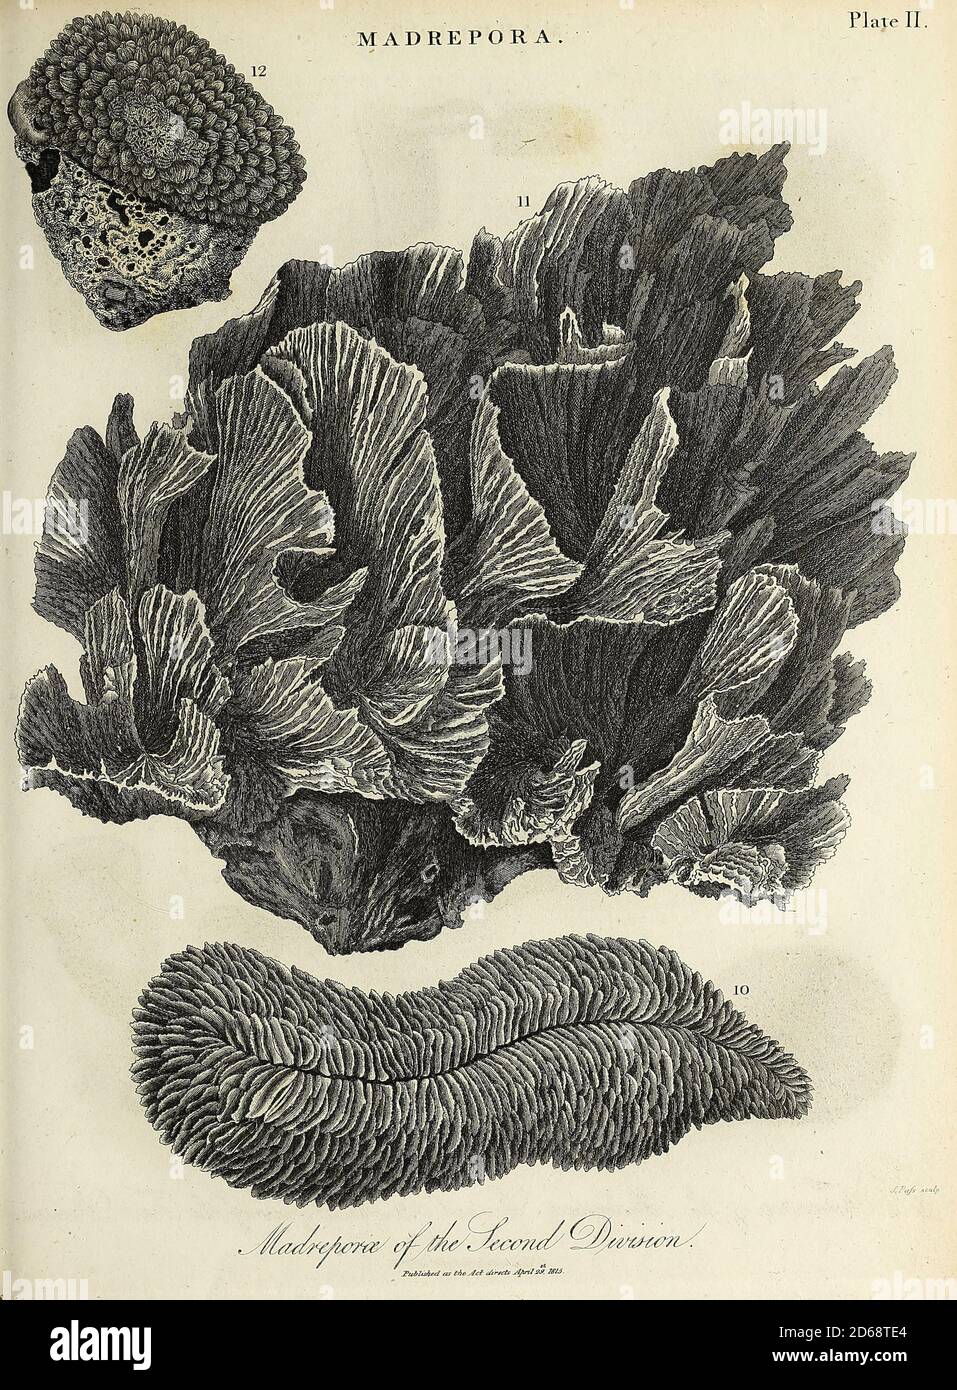 19th century illustration of Madrepora ('mother of pores') is a genus of stony corals, often found forming reefs or islands in tropical locations. The names Madrepore and Madreporaria were formerly applied universally to any stony coral of the family Scleractinia. They reproduce in three separate ways as discovered by the marine zoologist Anne Thynne (1800-1866).[2] It is commonly known as horn coral. colony is branched with small polyps in cylindrical cups separated by perforated coenosteum. Terminal polyp bear six tentacles, while lateral polyps bear tweve tentacles. Madrepora is economicall Stock Photo